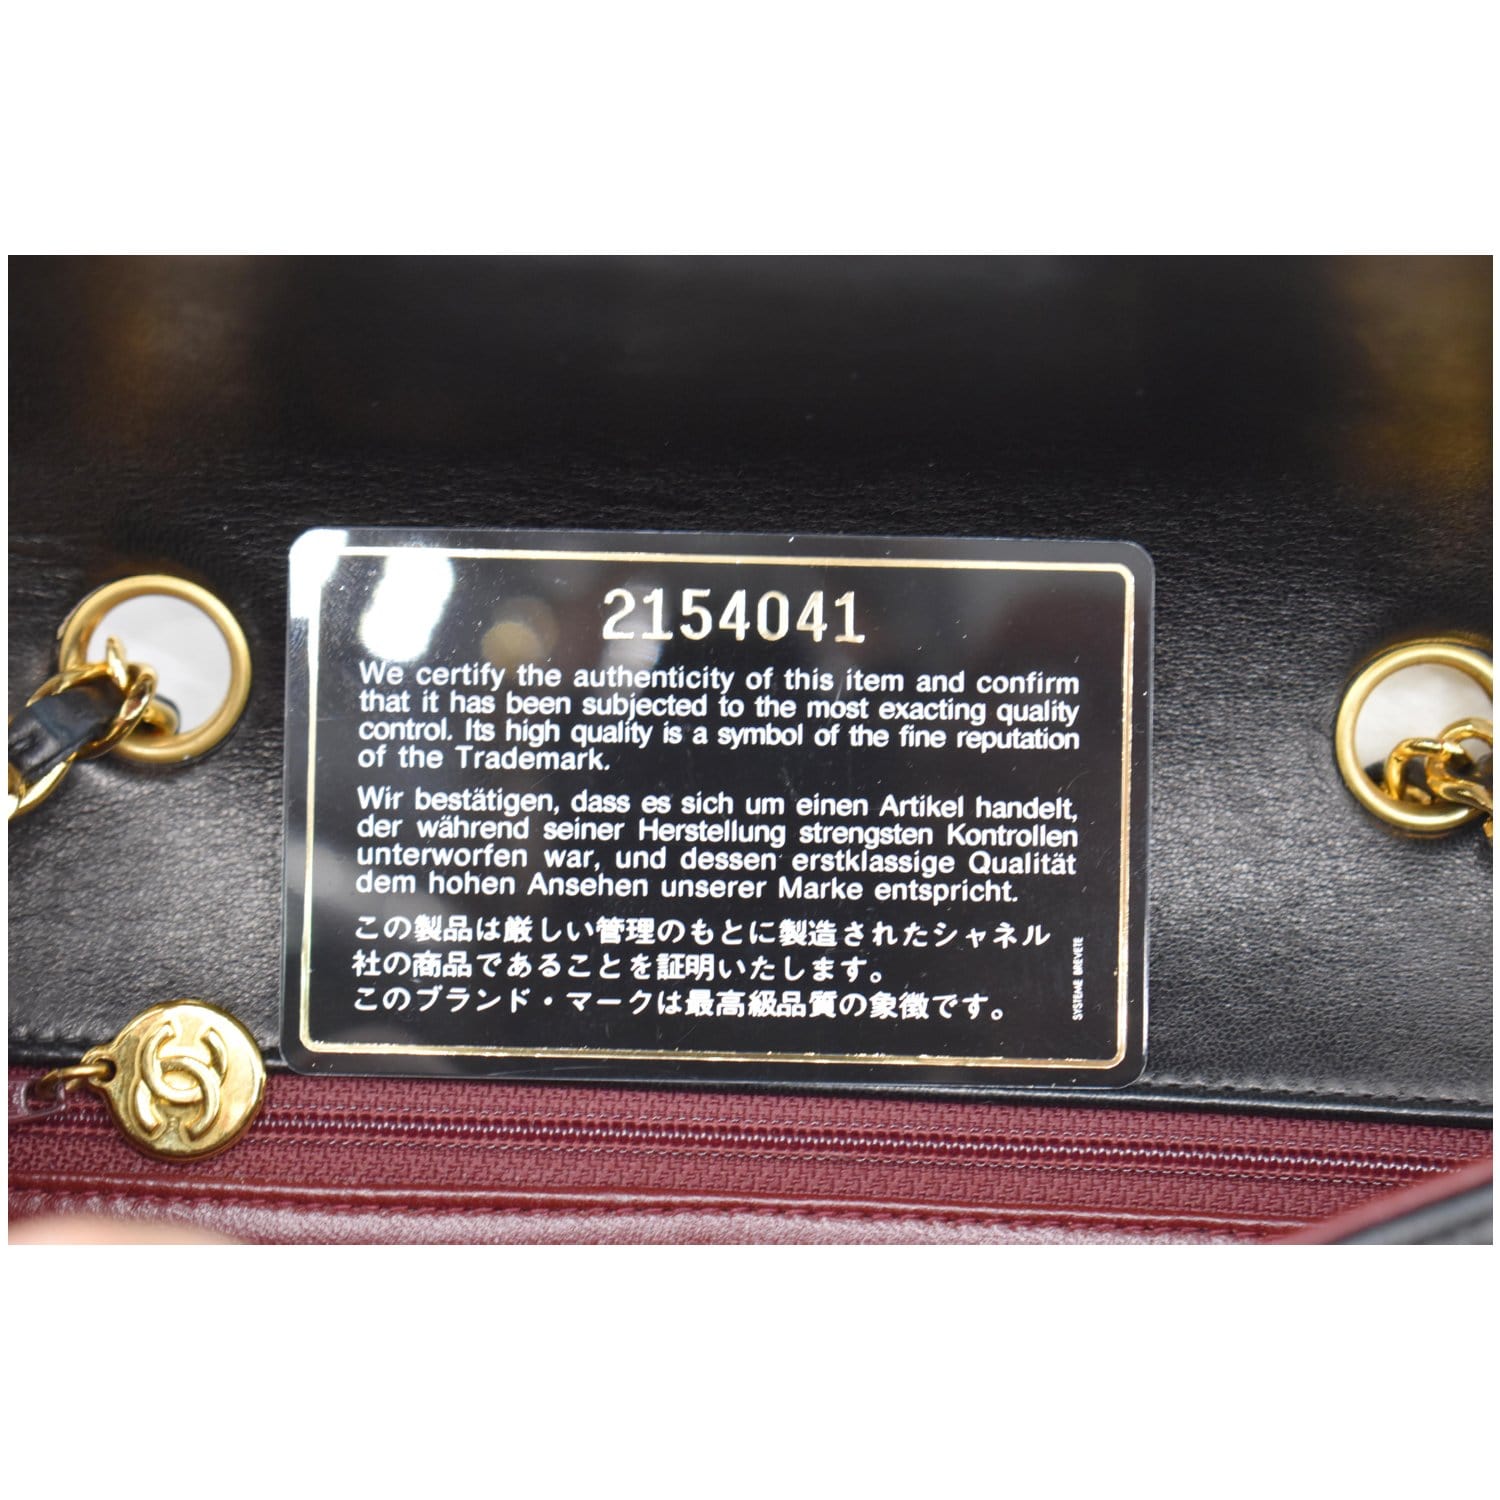 CHANEL Diana Bags, Authenticity Guaranteed